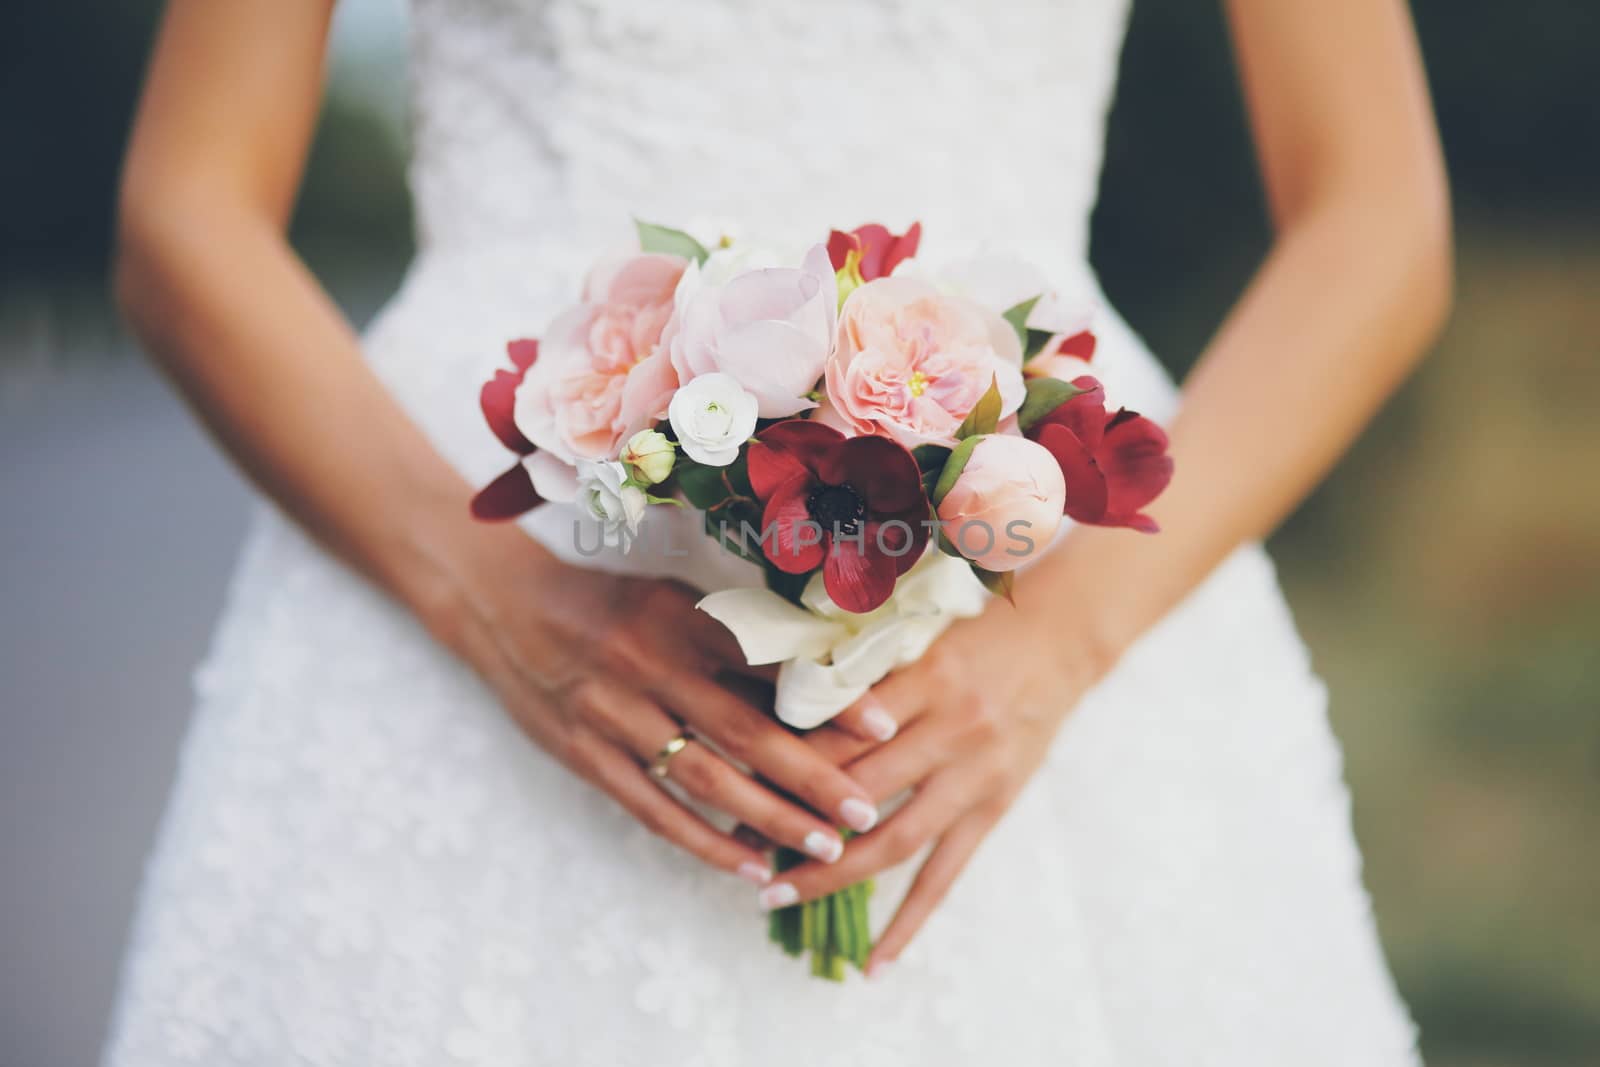 The bride holds a wedding bouquet. Women's hands with flowers by selinsmo